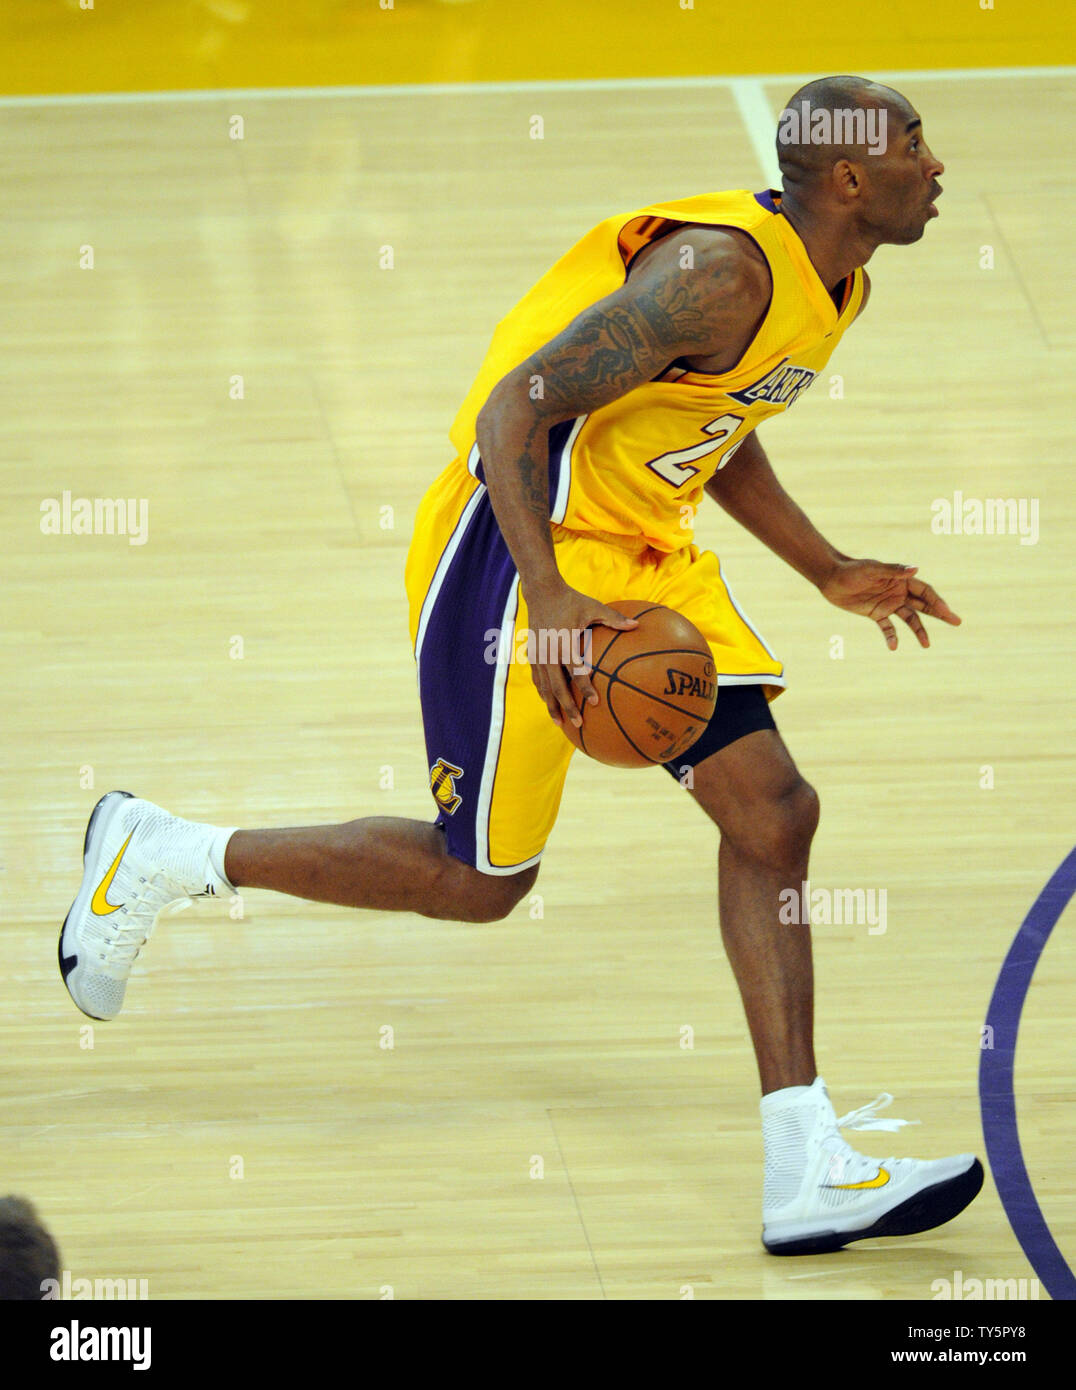 Los Angeles Lakers' Kobe Bryant drives the ball up court against the Minnesota Timberwolves in the first half at Staples Center in Los Angeles on October 28, 2015. The Timberwolves defeated the Lakers 112-111.  Photo by Lori Shepler/UPI Stock Photo